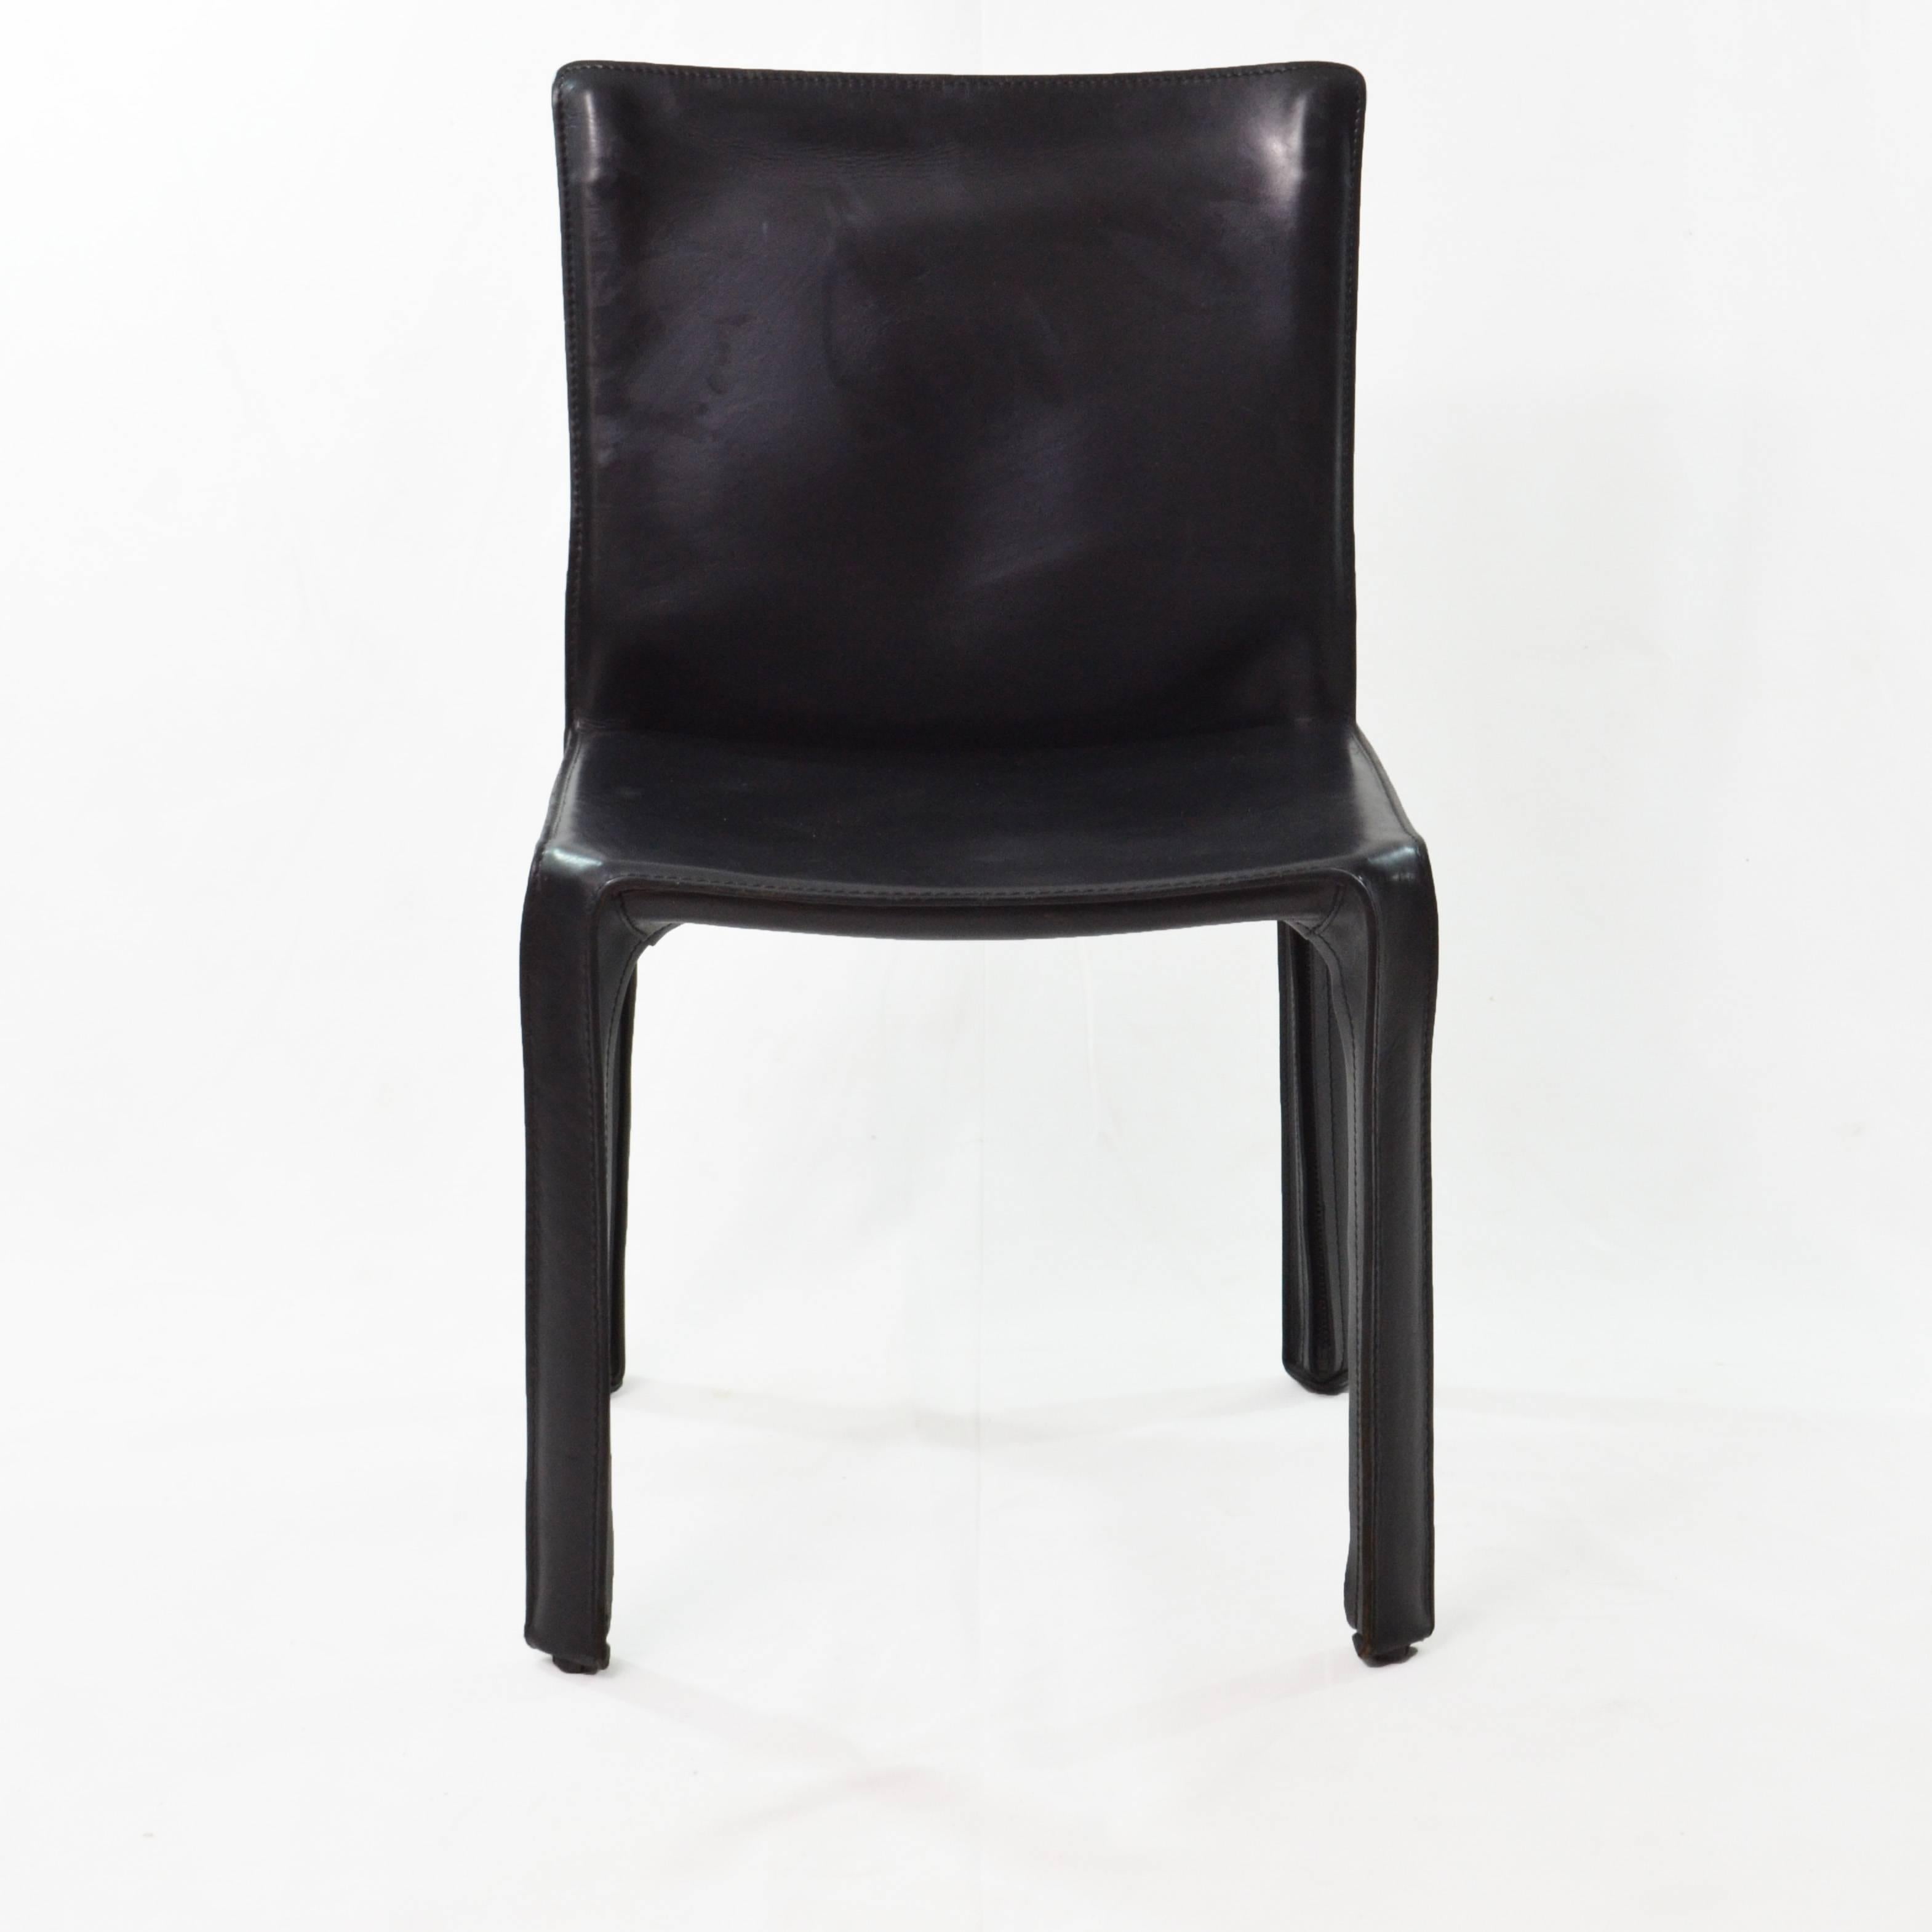 Set of 2 Cab chairs model. nr 412 in black leather - Cab was conceived by the architect Mario Bellini in 1977: a skeleton in tubular steel and stretched, stitched leather, fastened to the frame with four zips. The Cab chair is part of the collection